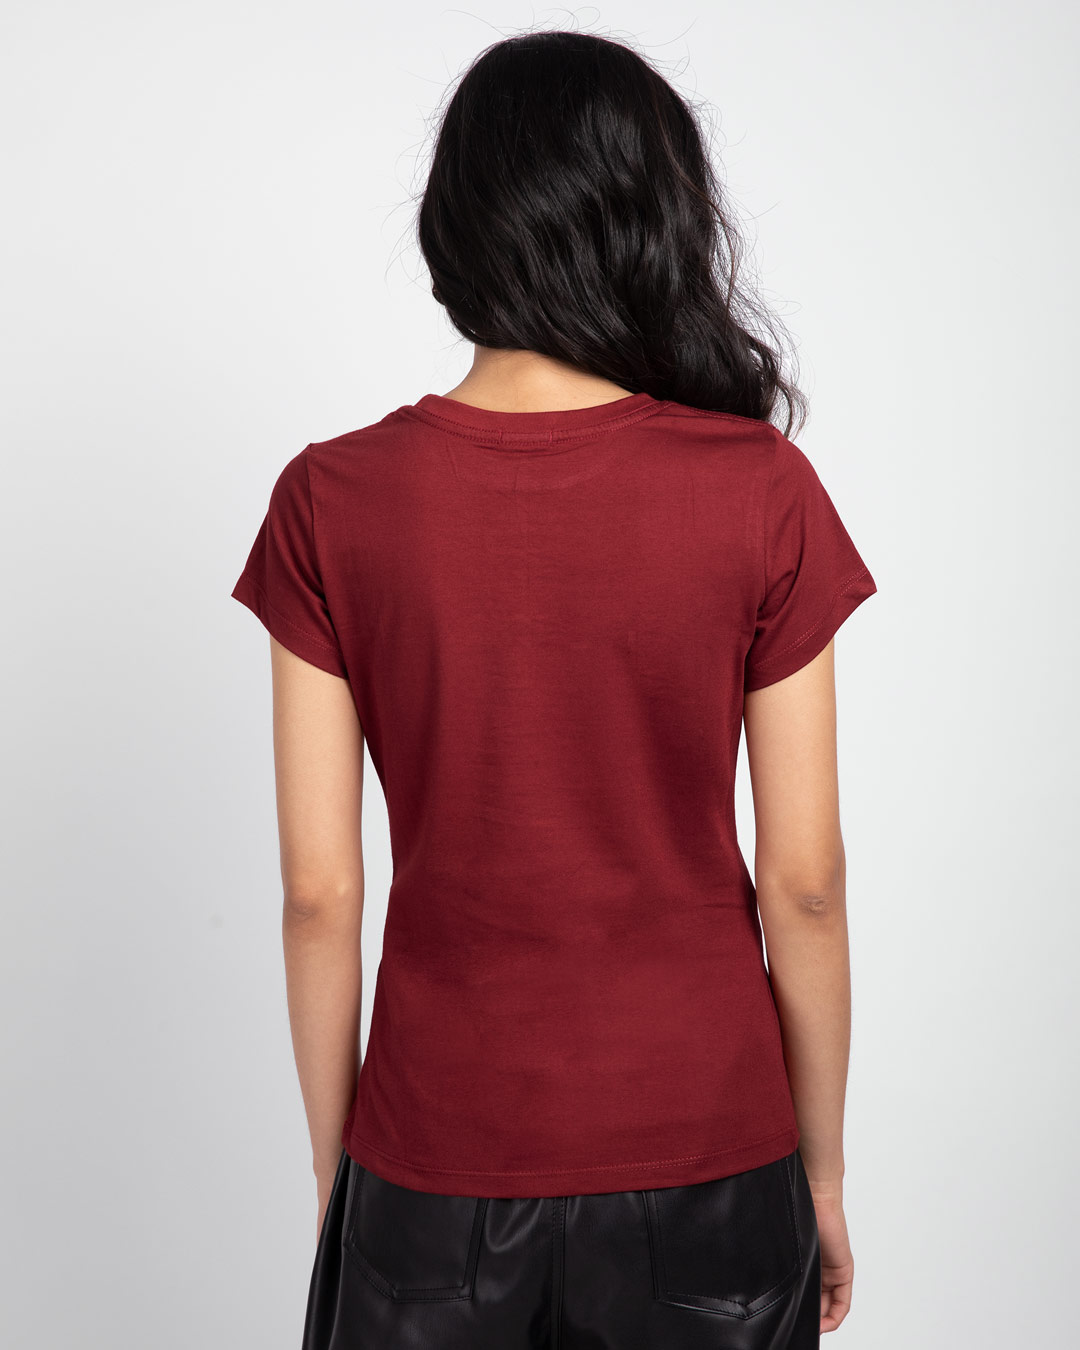 Shop This Too Shall Pass Half Sleeve T-Shirt Scarlet Red-Back